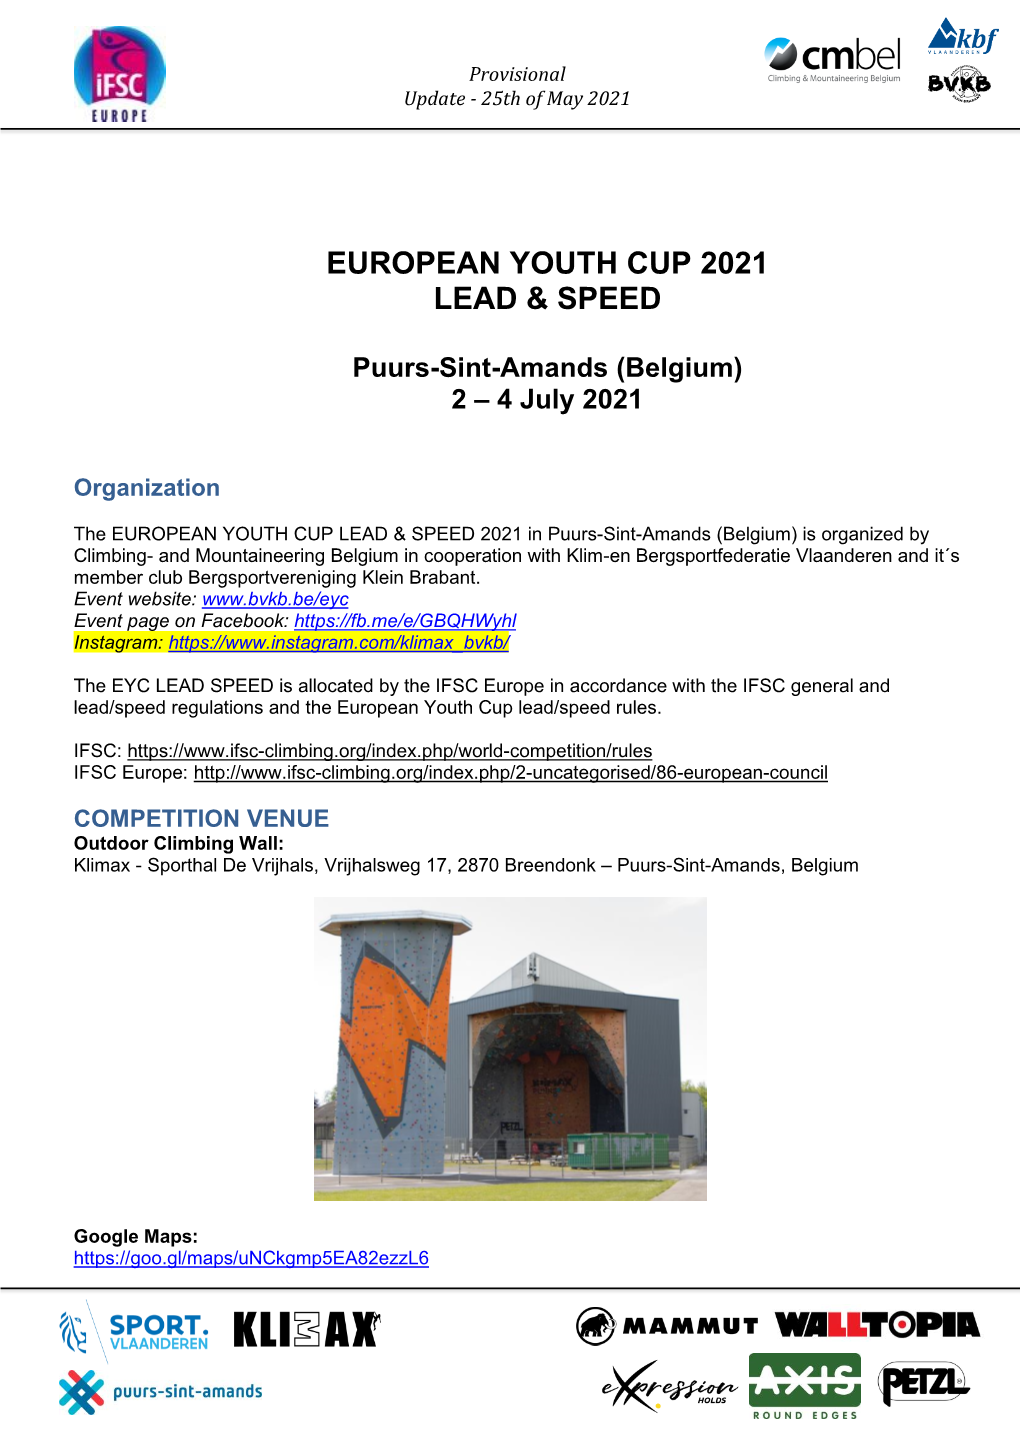 European Youth Cup 2021 Lead & Speed